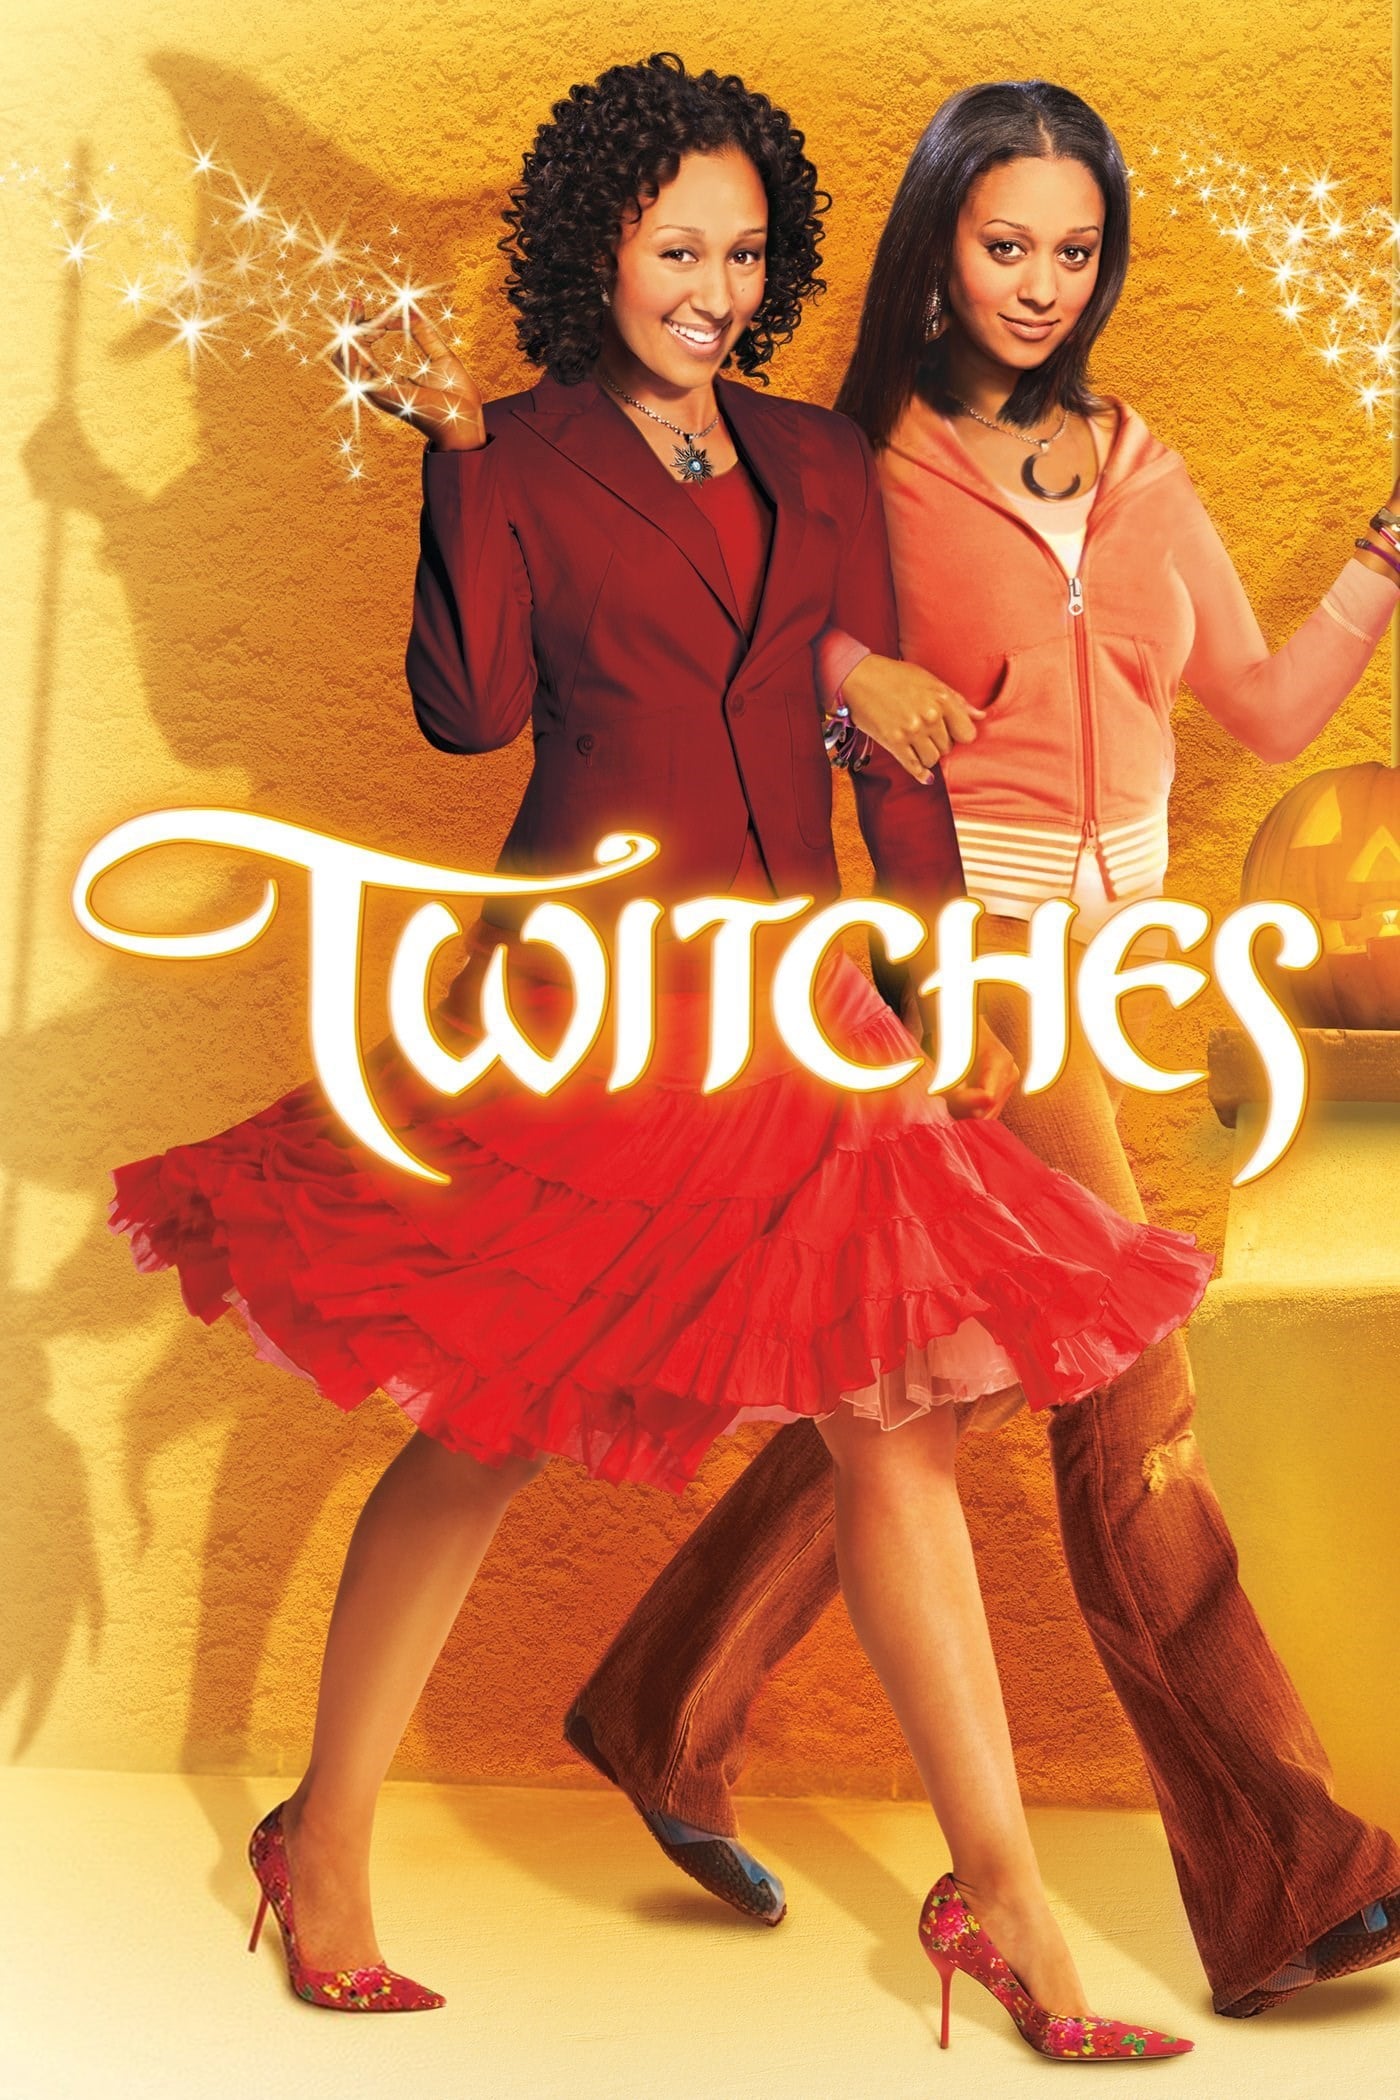 twitches movie review for parents